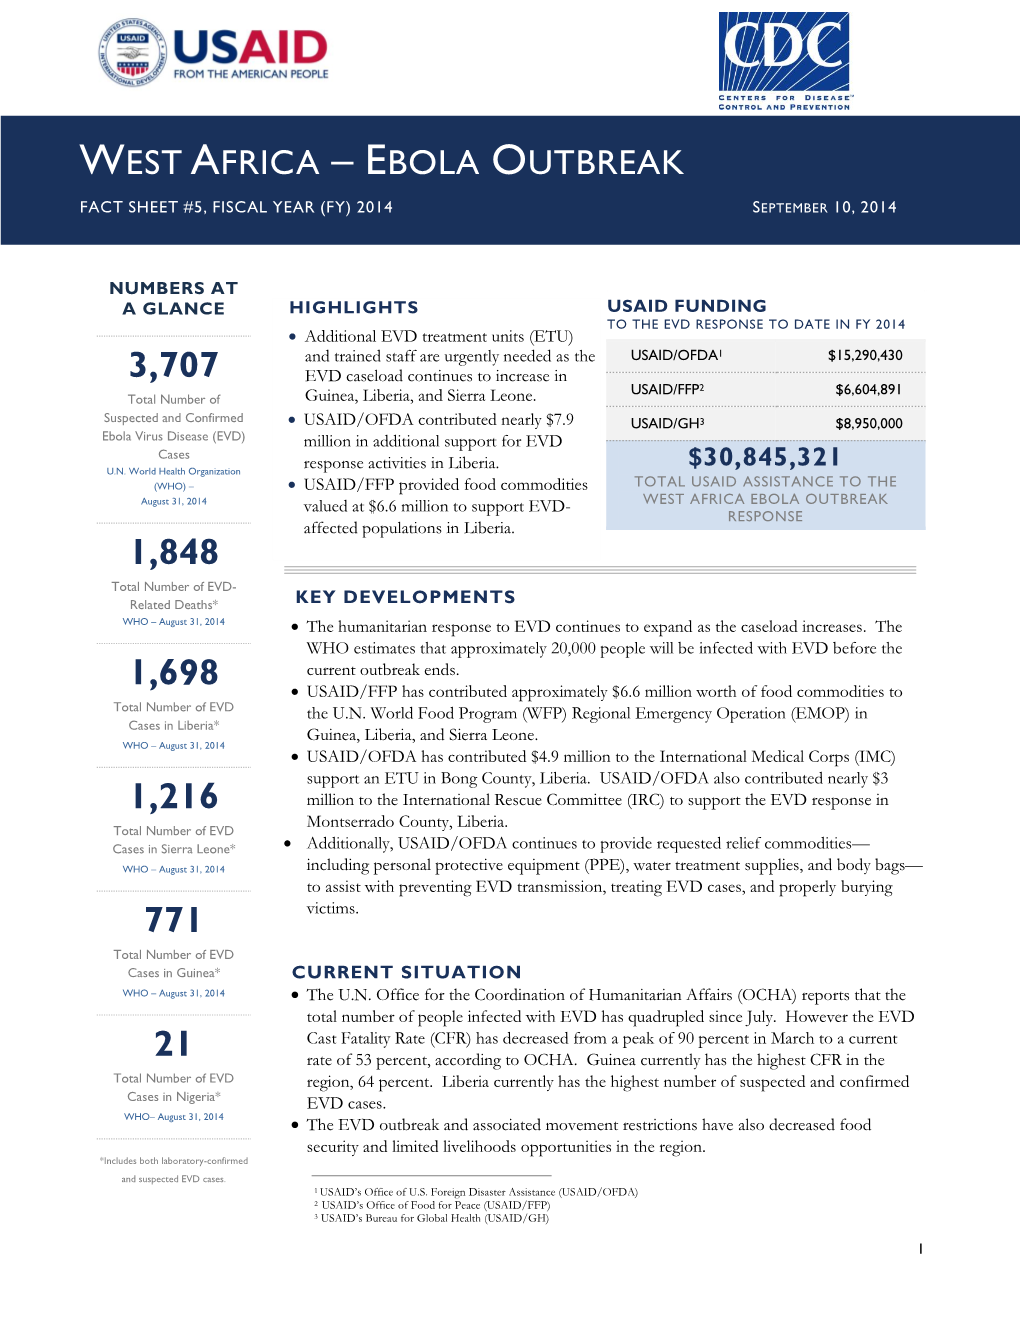 WEST AFRICA EBOLA OUTBREAK RESPONSE Affected Populations in Liberia